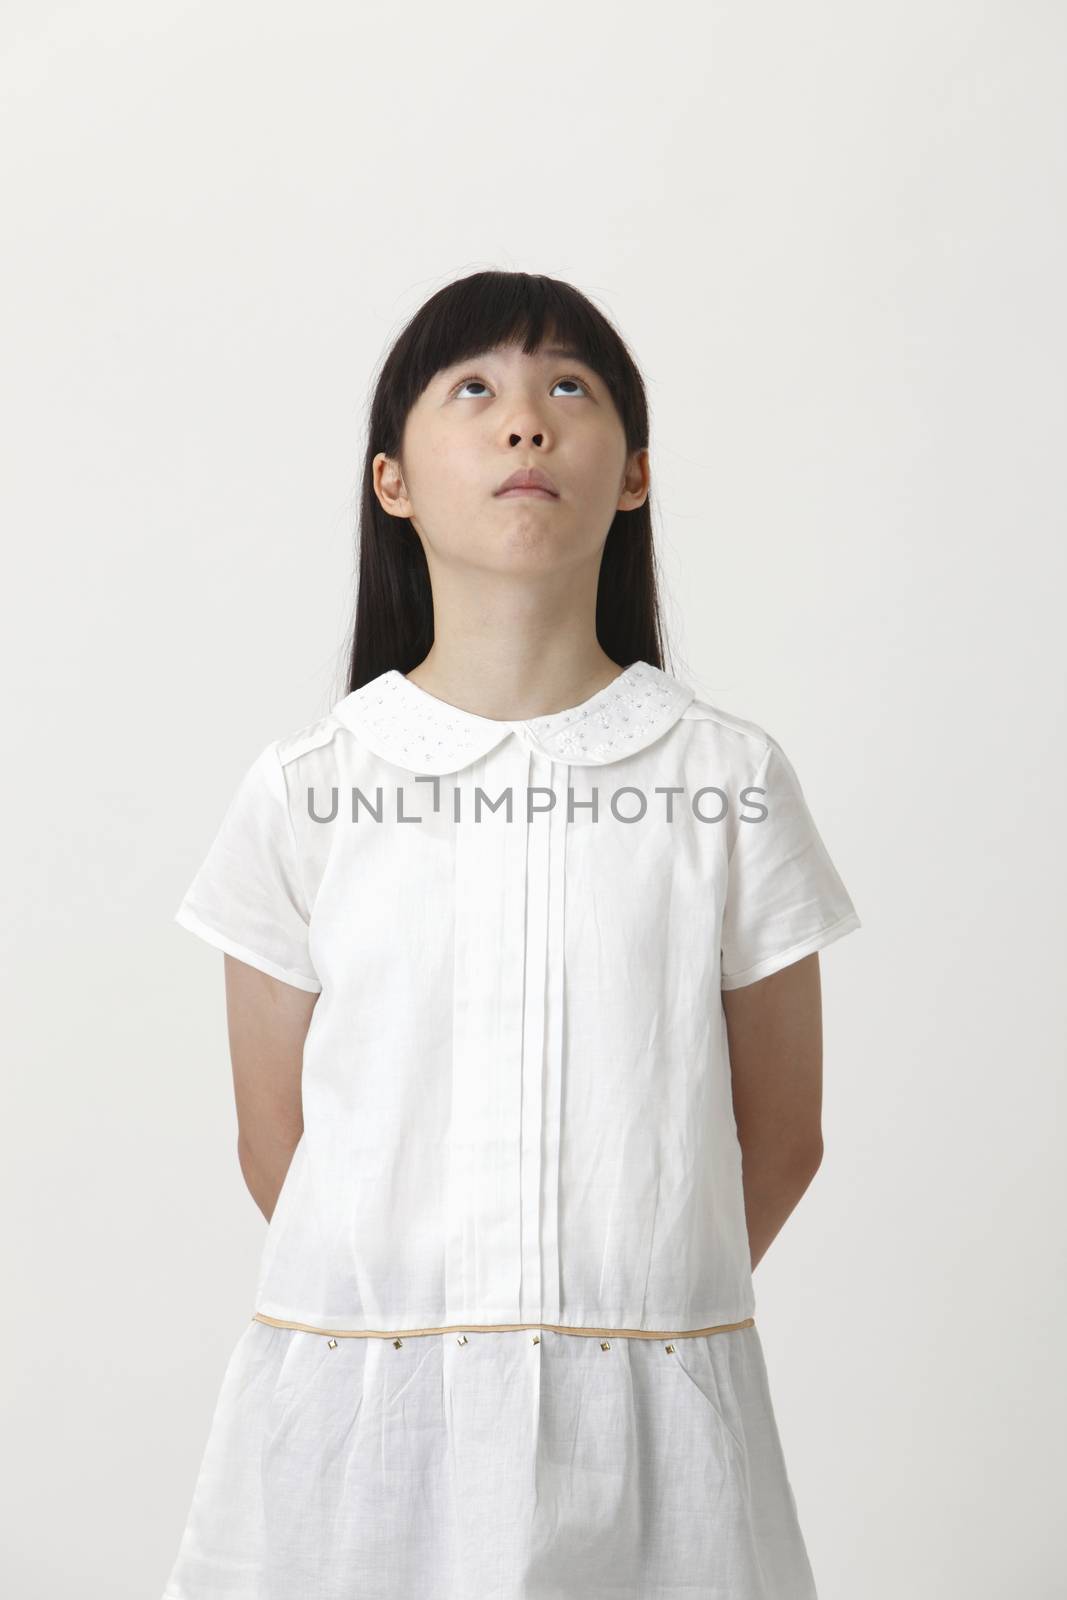 chinese girl with the doubtful expression